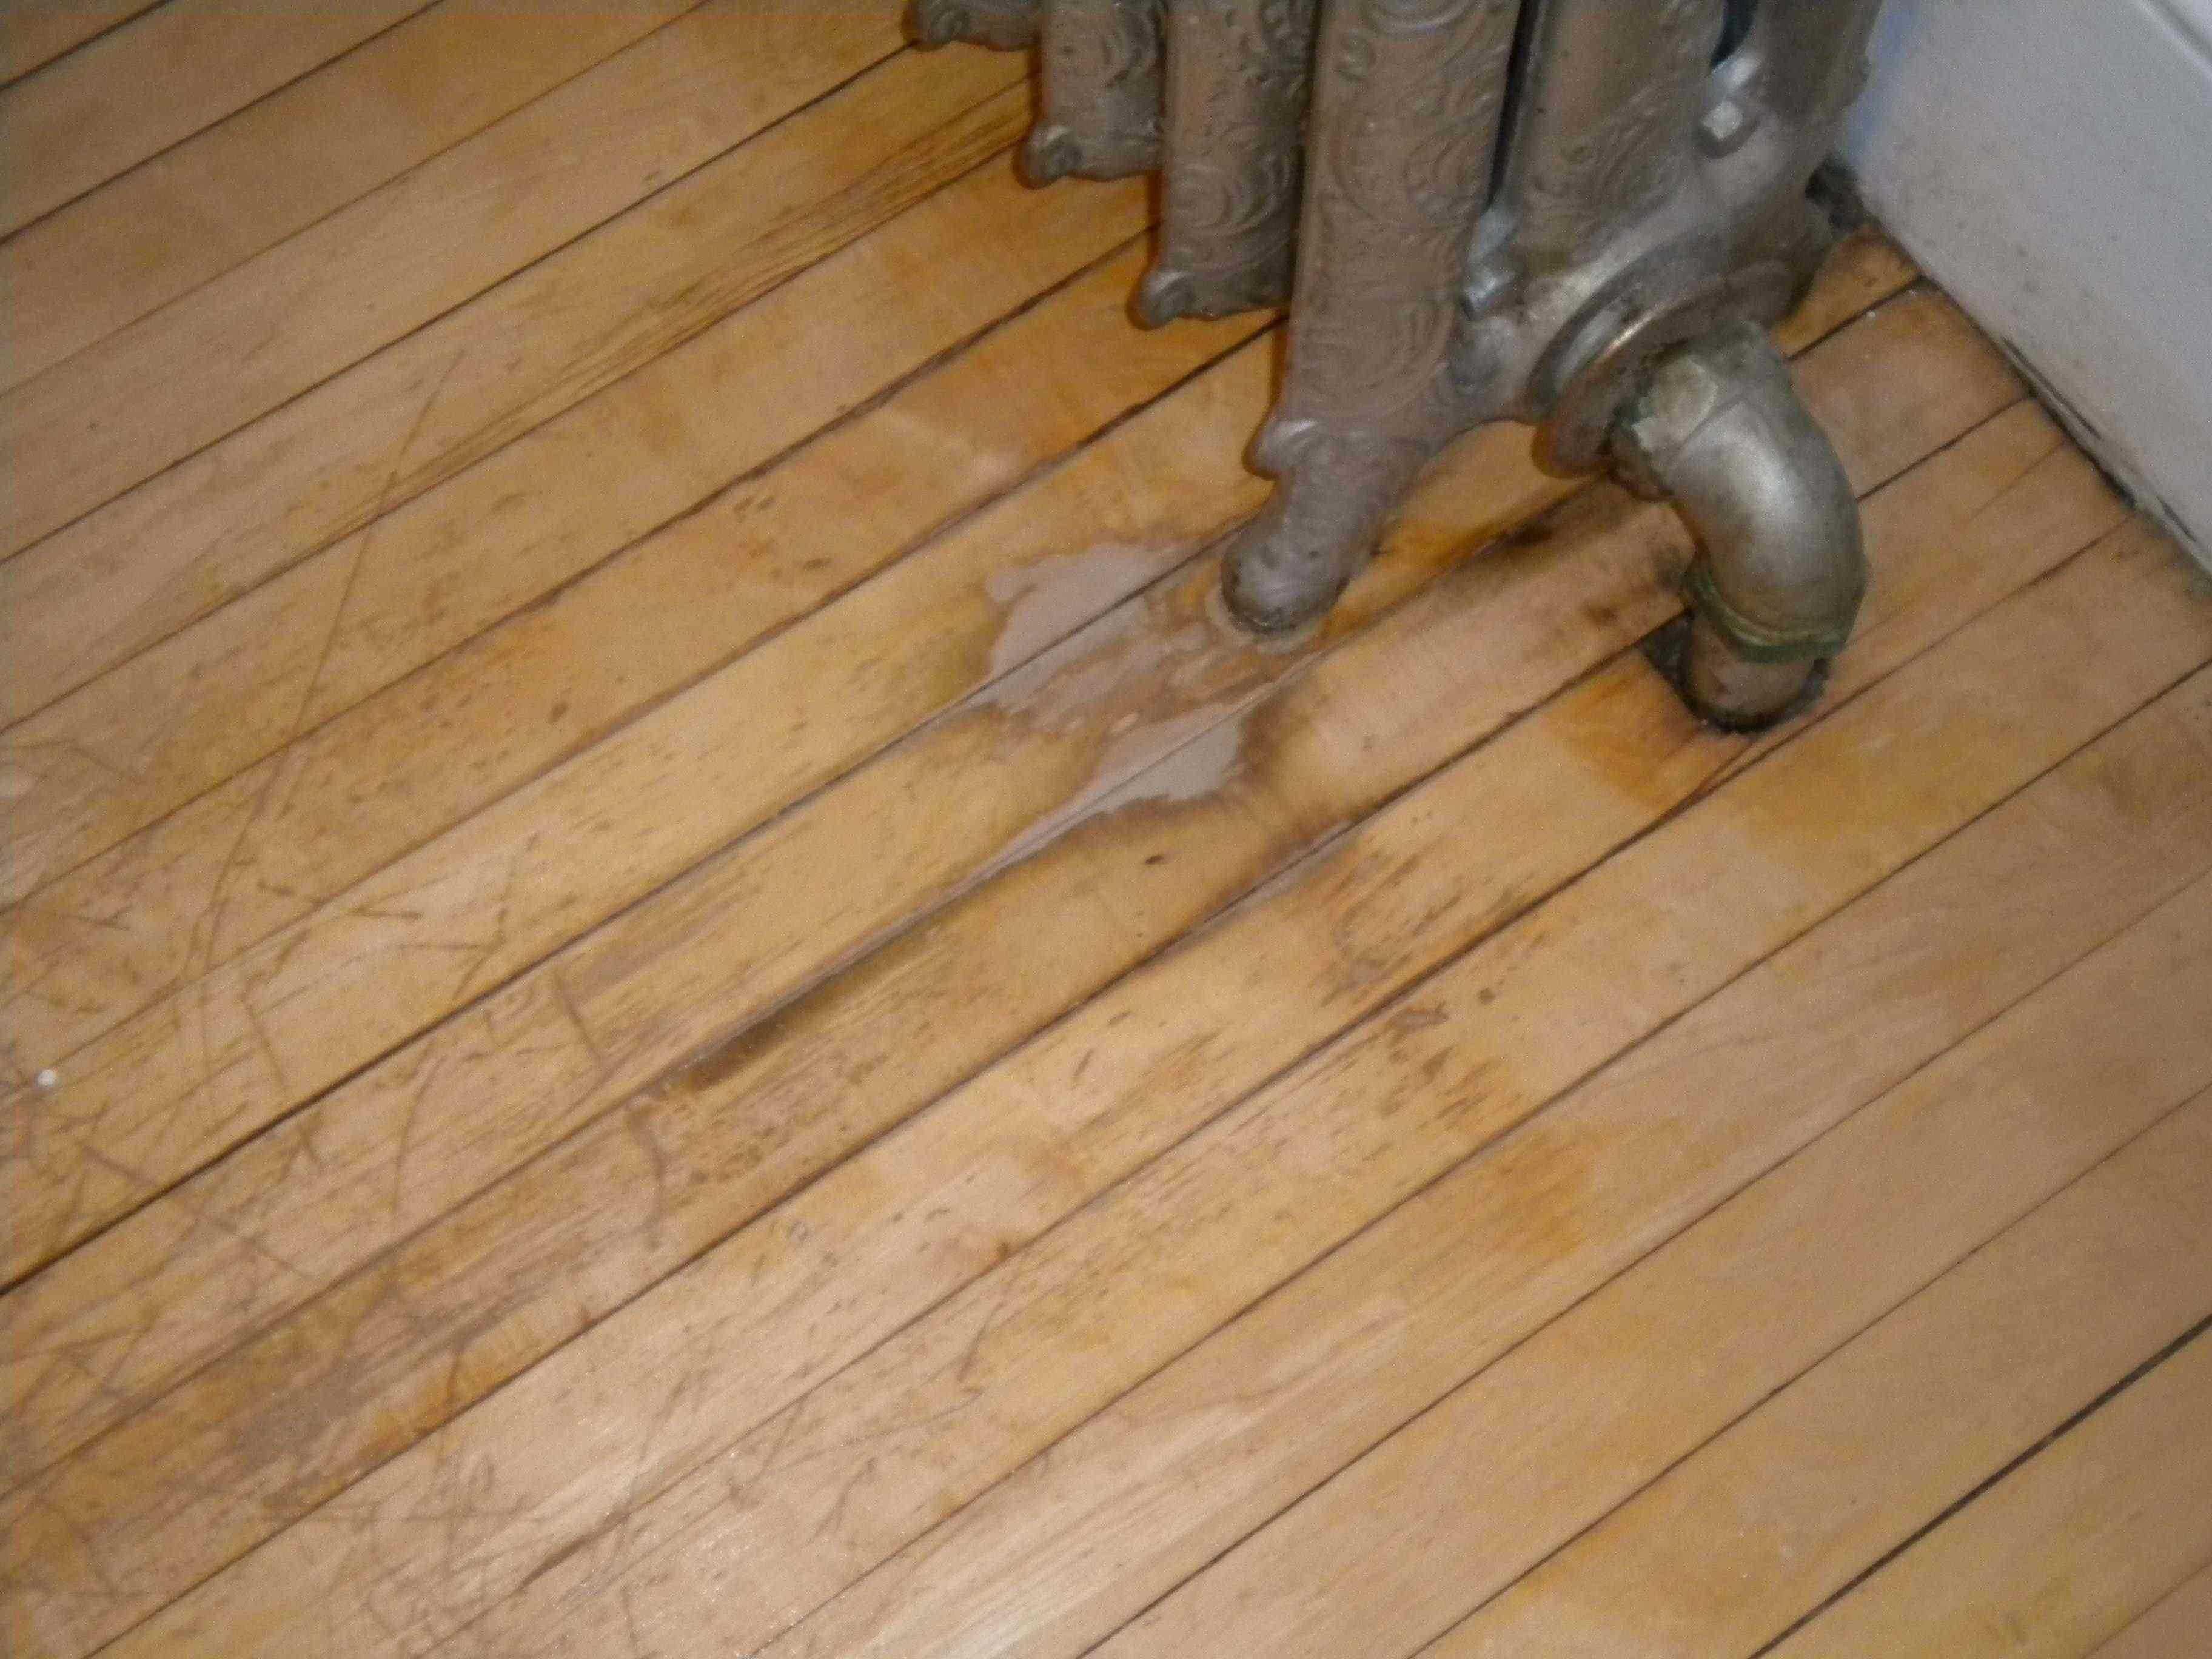 A spot of discoloration in wood floor | The Home Depot Community